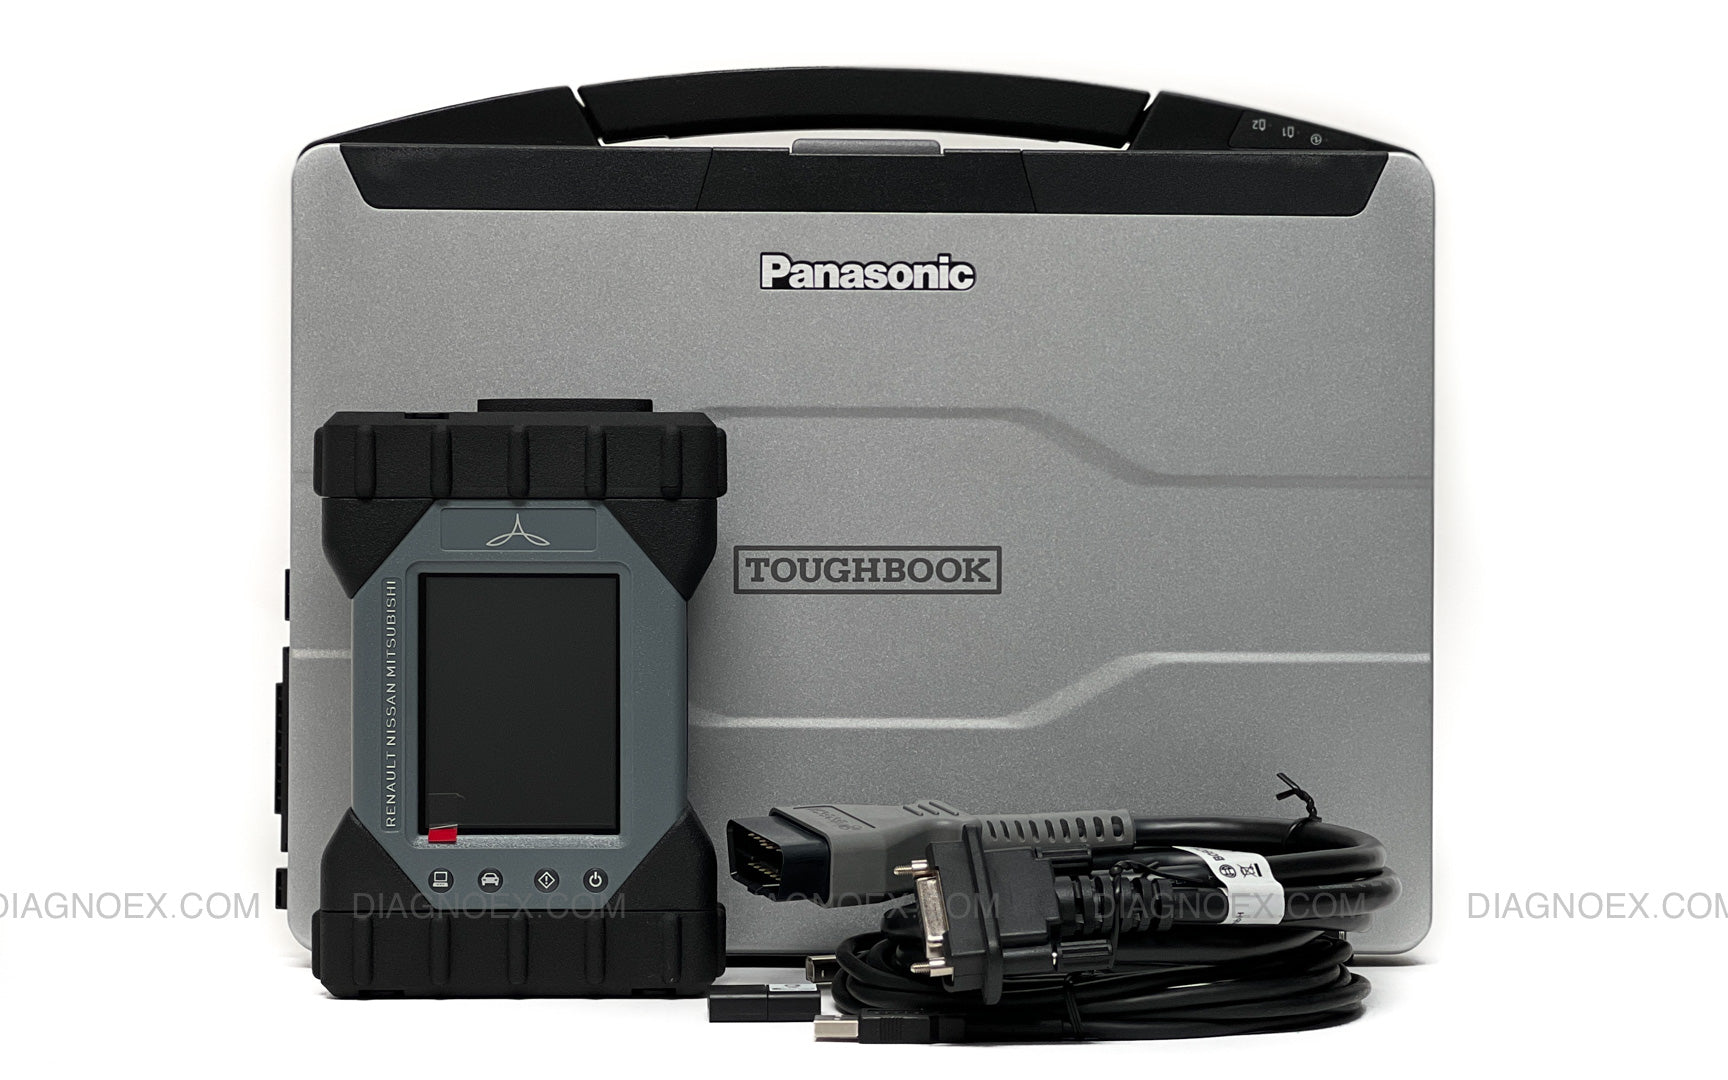 Nissan INFINITI Diagnostic Consult Kit with VI3